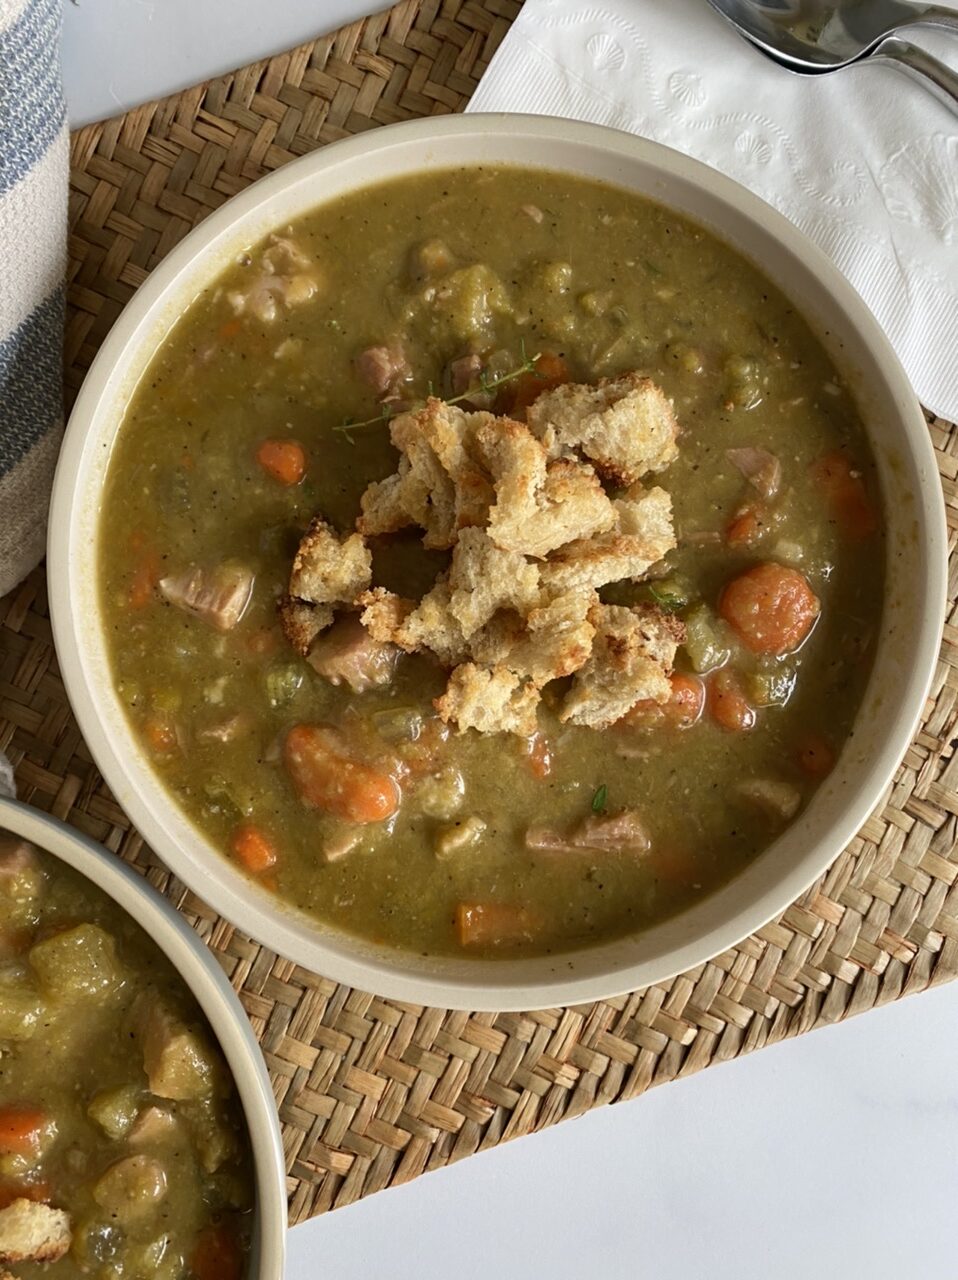 Two bowls of split pea soup with croutons and spoons on a woven mat